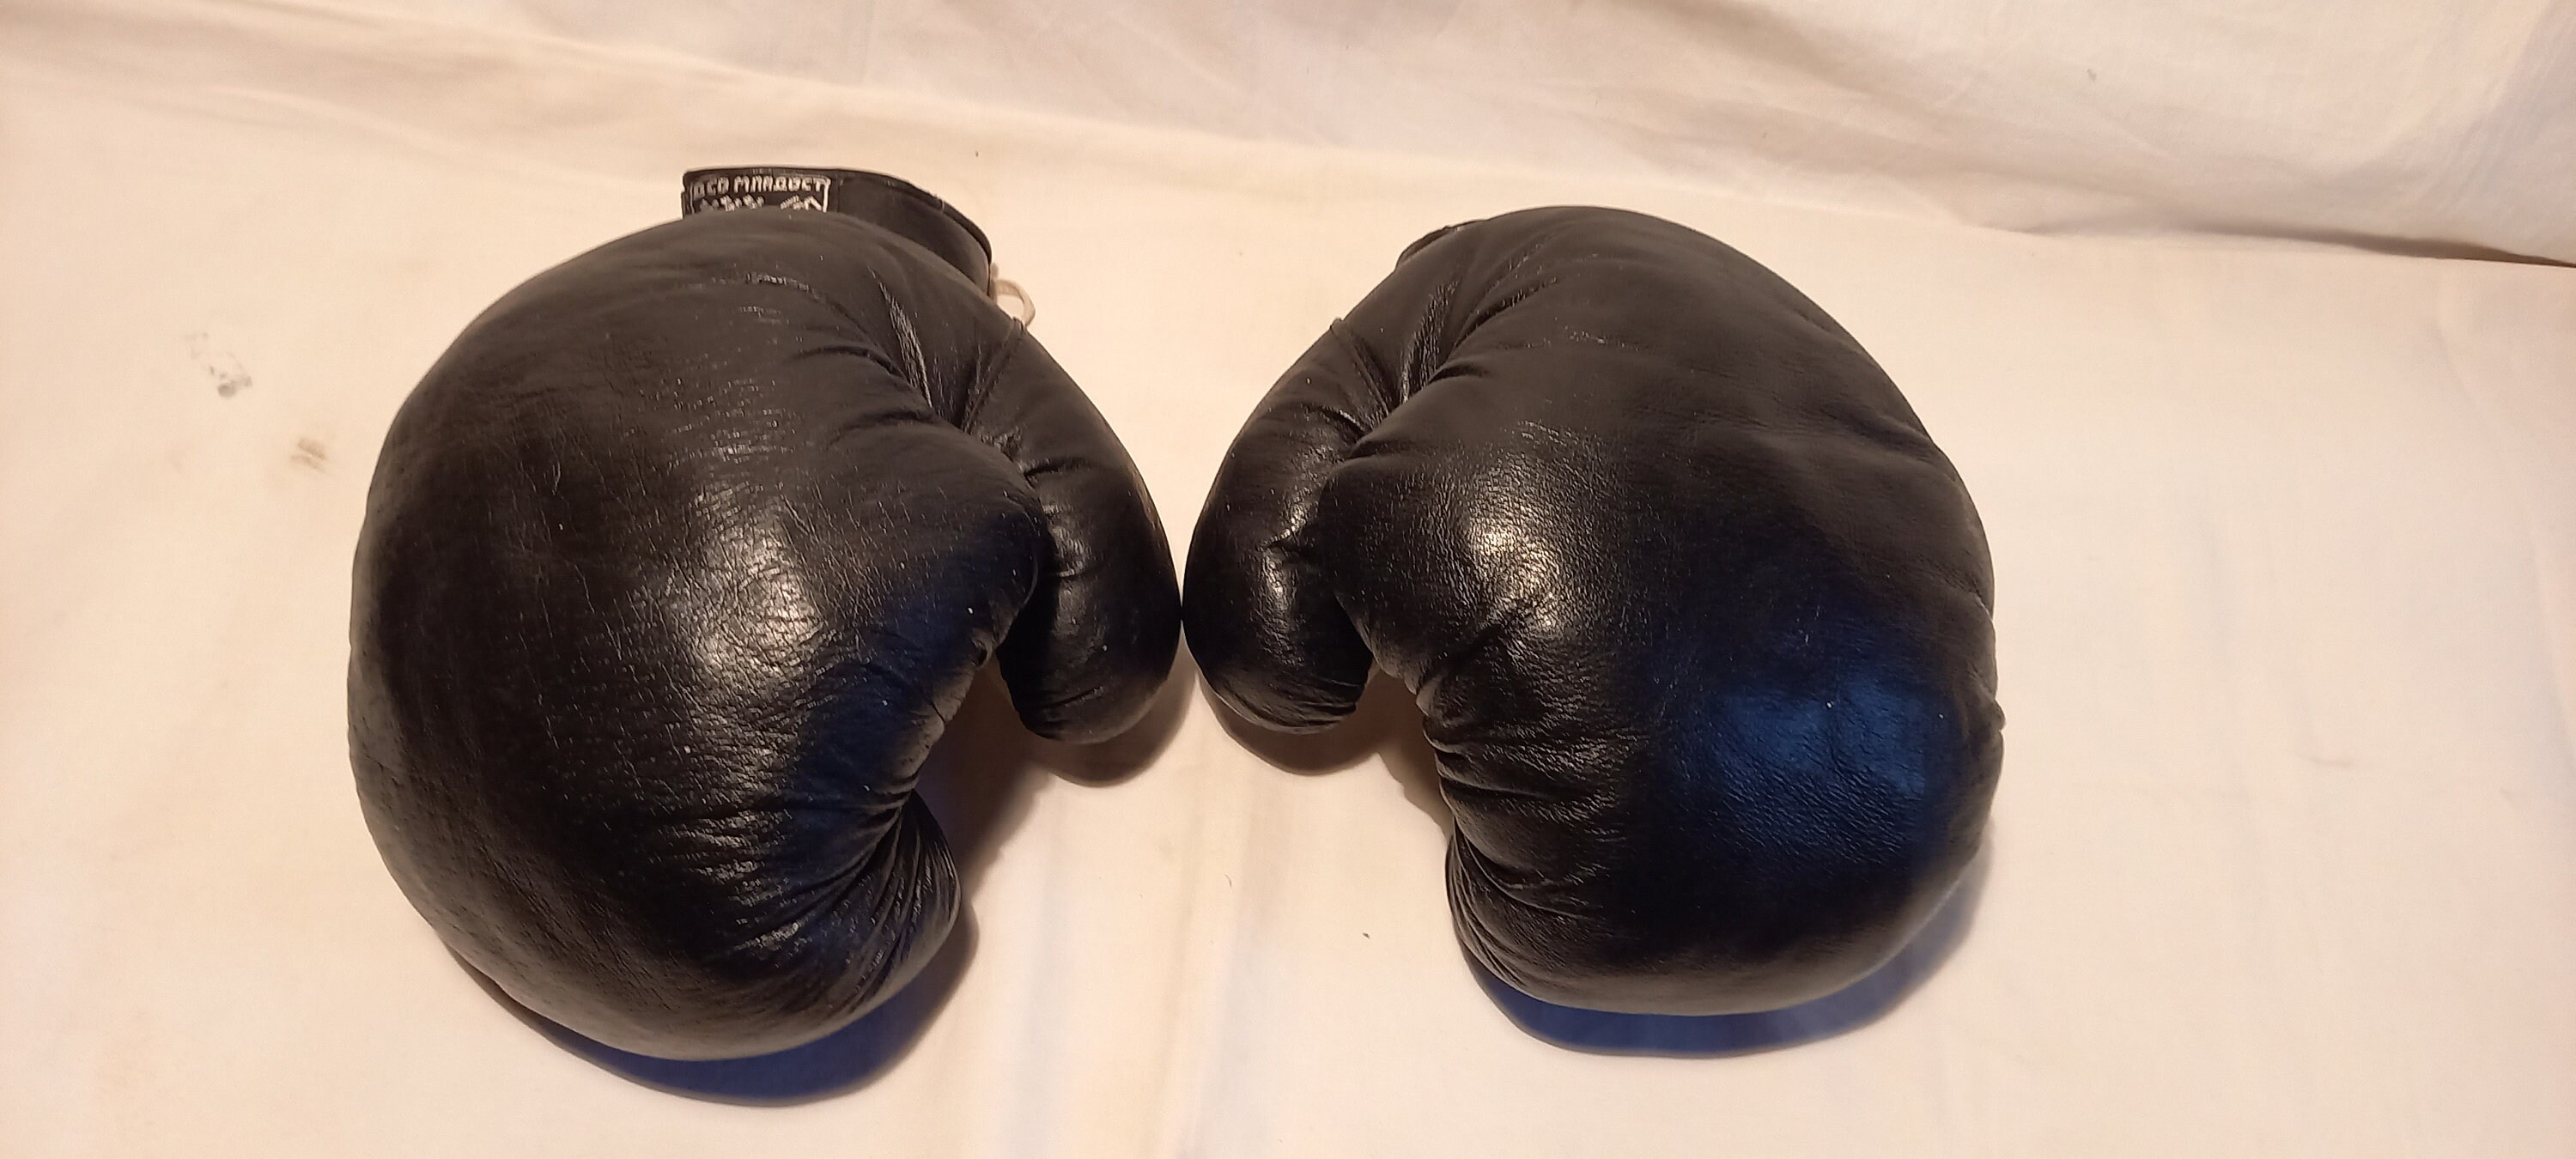 Toys & Games Sports & Outdoor Recreation Martial Arts & Boxing Boxing Gloves Vintage 1970's Dark Brown & White Leather Boxing Gloves. 